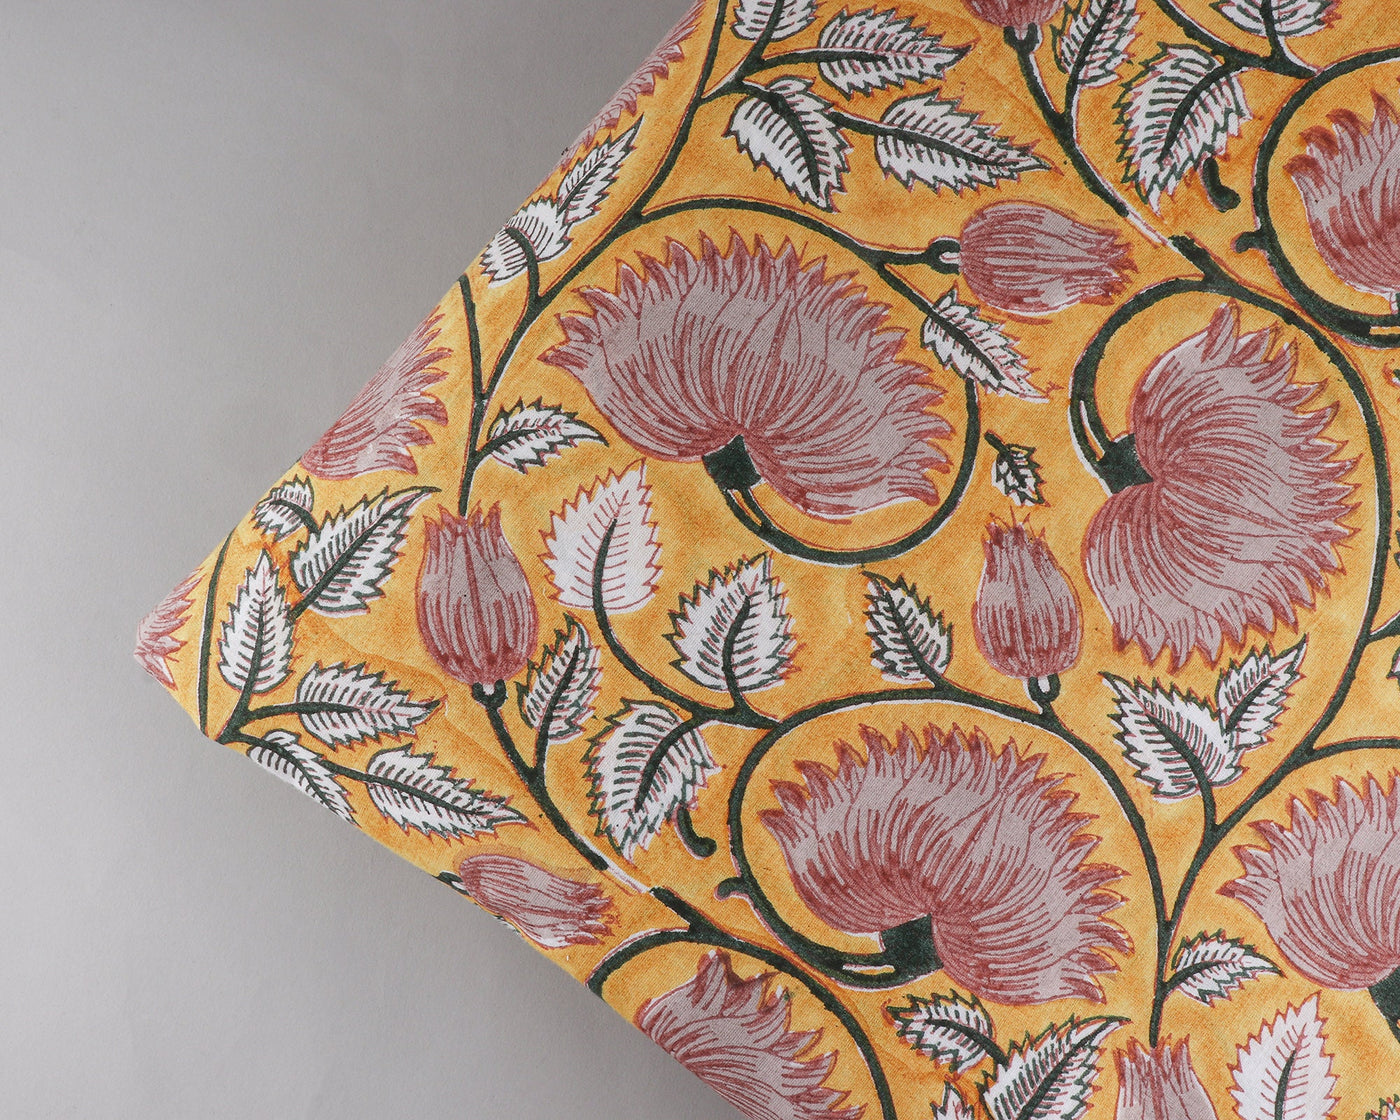 Fire Yellow and Lemonade Pink Indian Floral Hand Block Printed 100% Pure Cotton Cloth, Fabric by the yard, Women's Clothing Curtains Dresses